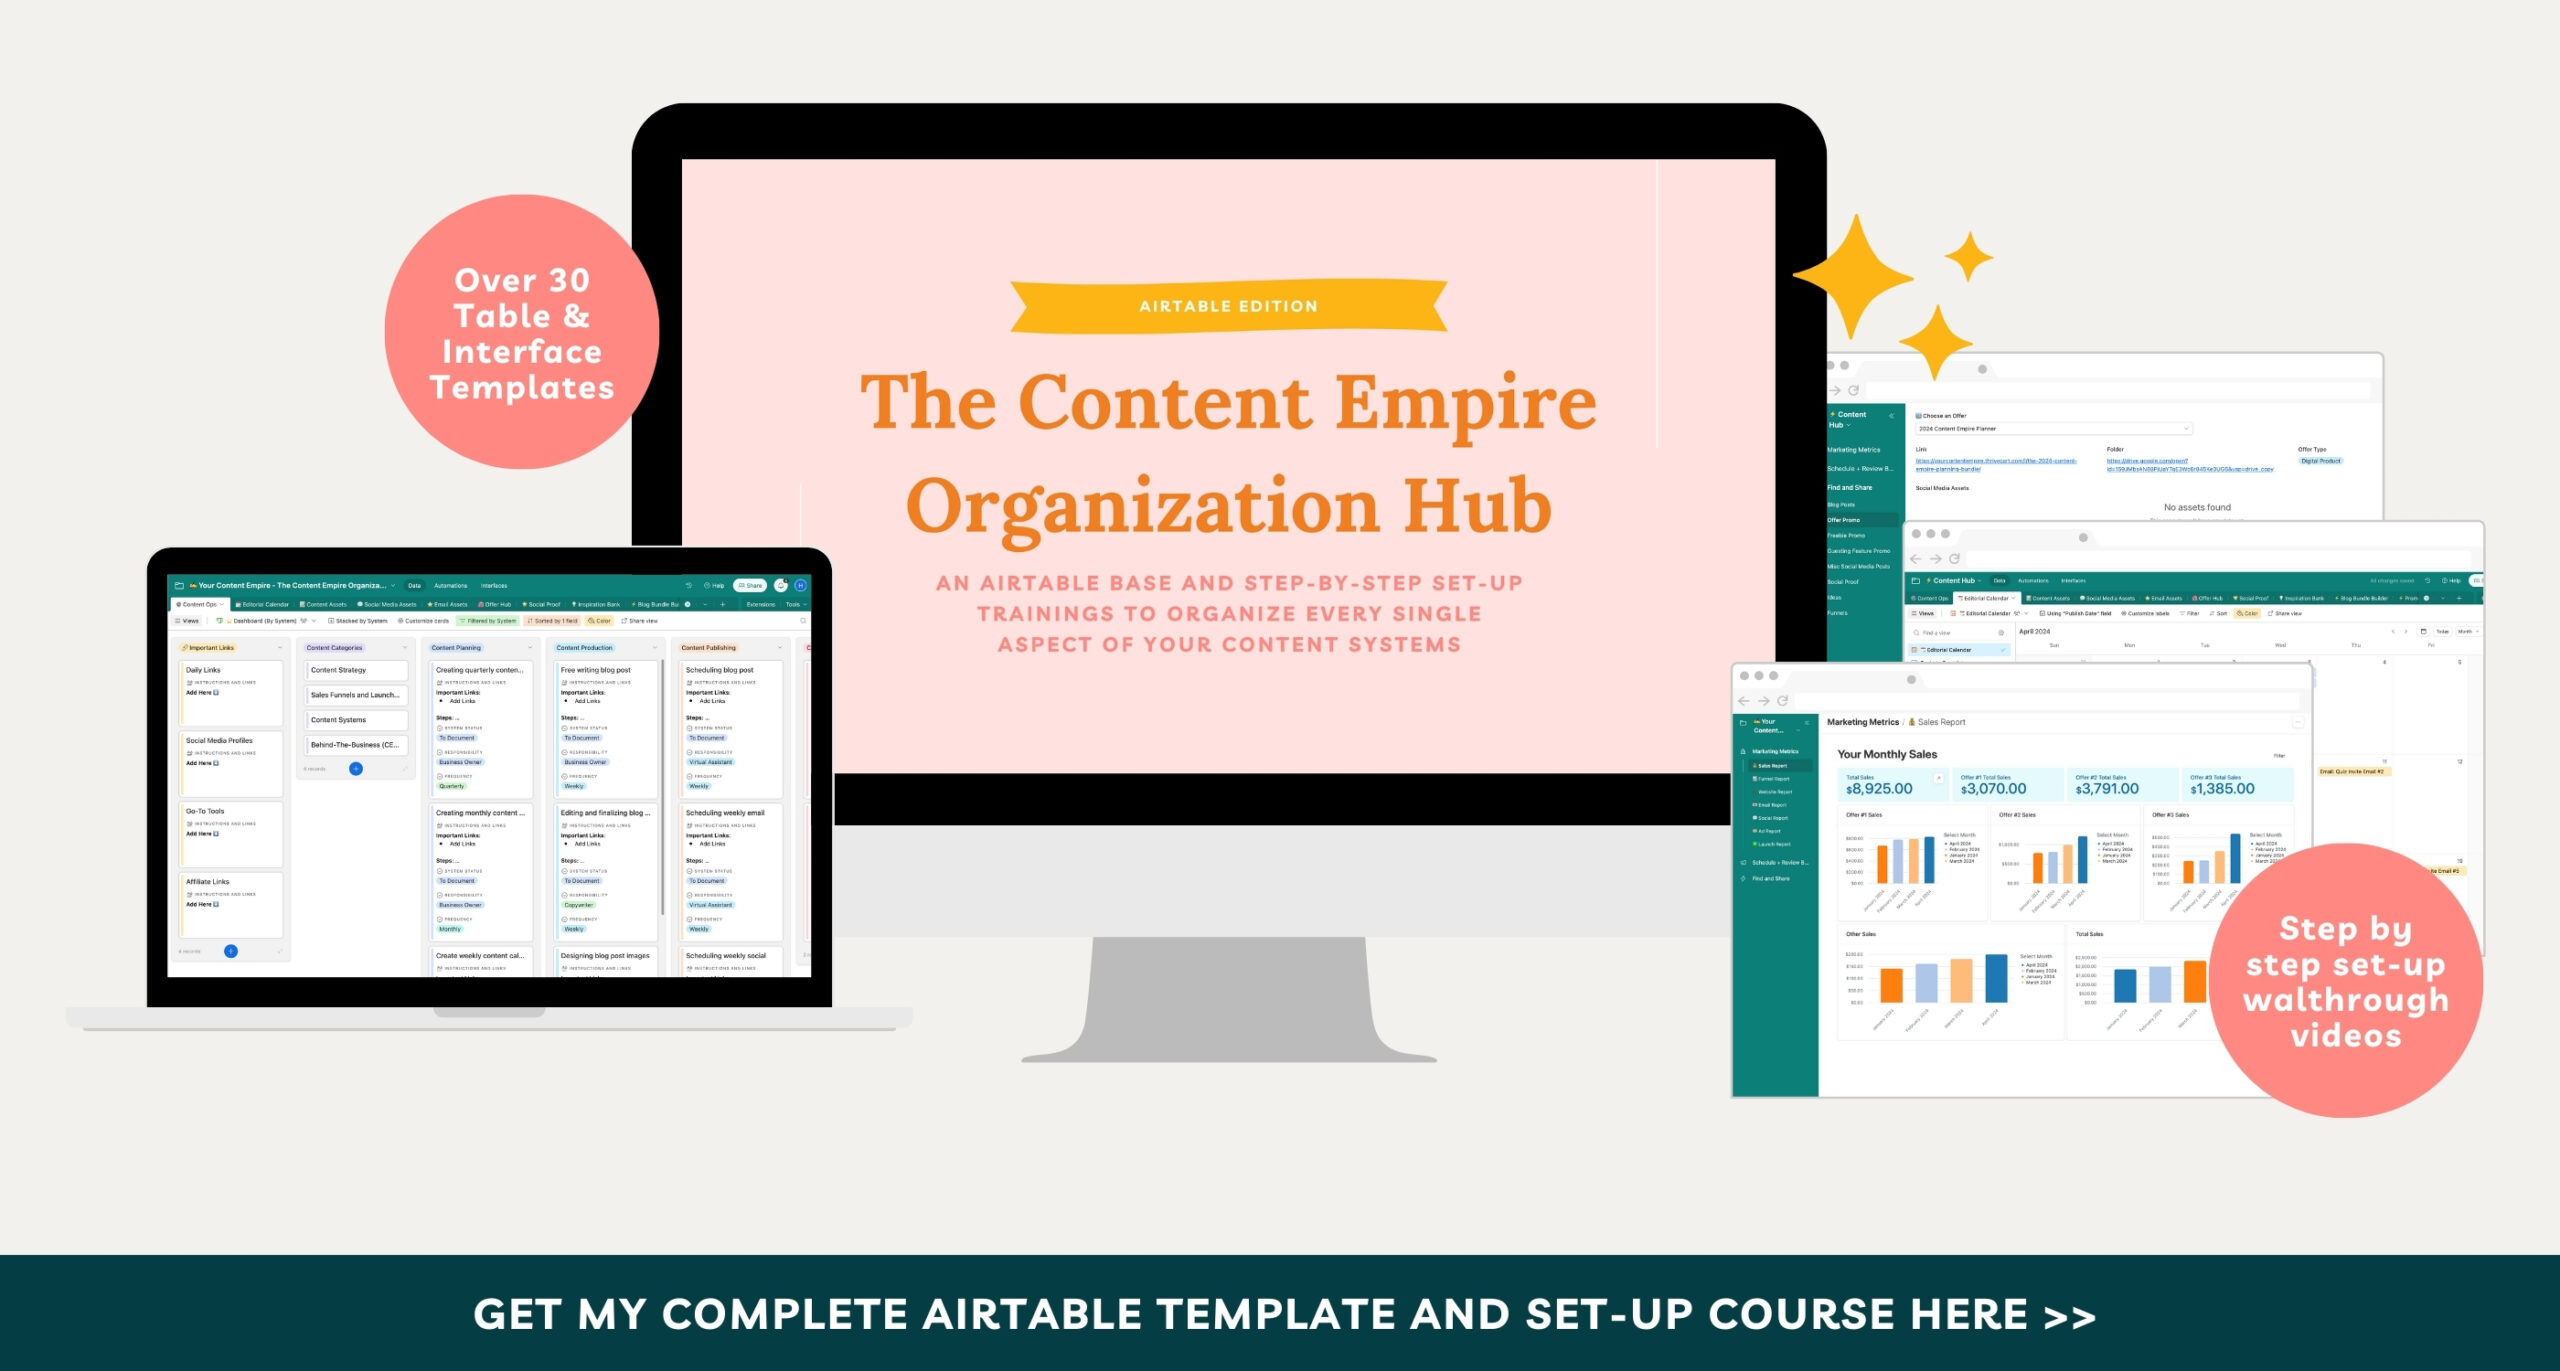 Your Content Empire - The Content Empire Organization Hub - Airtable Edition